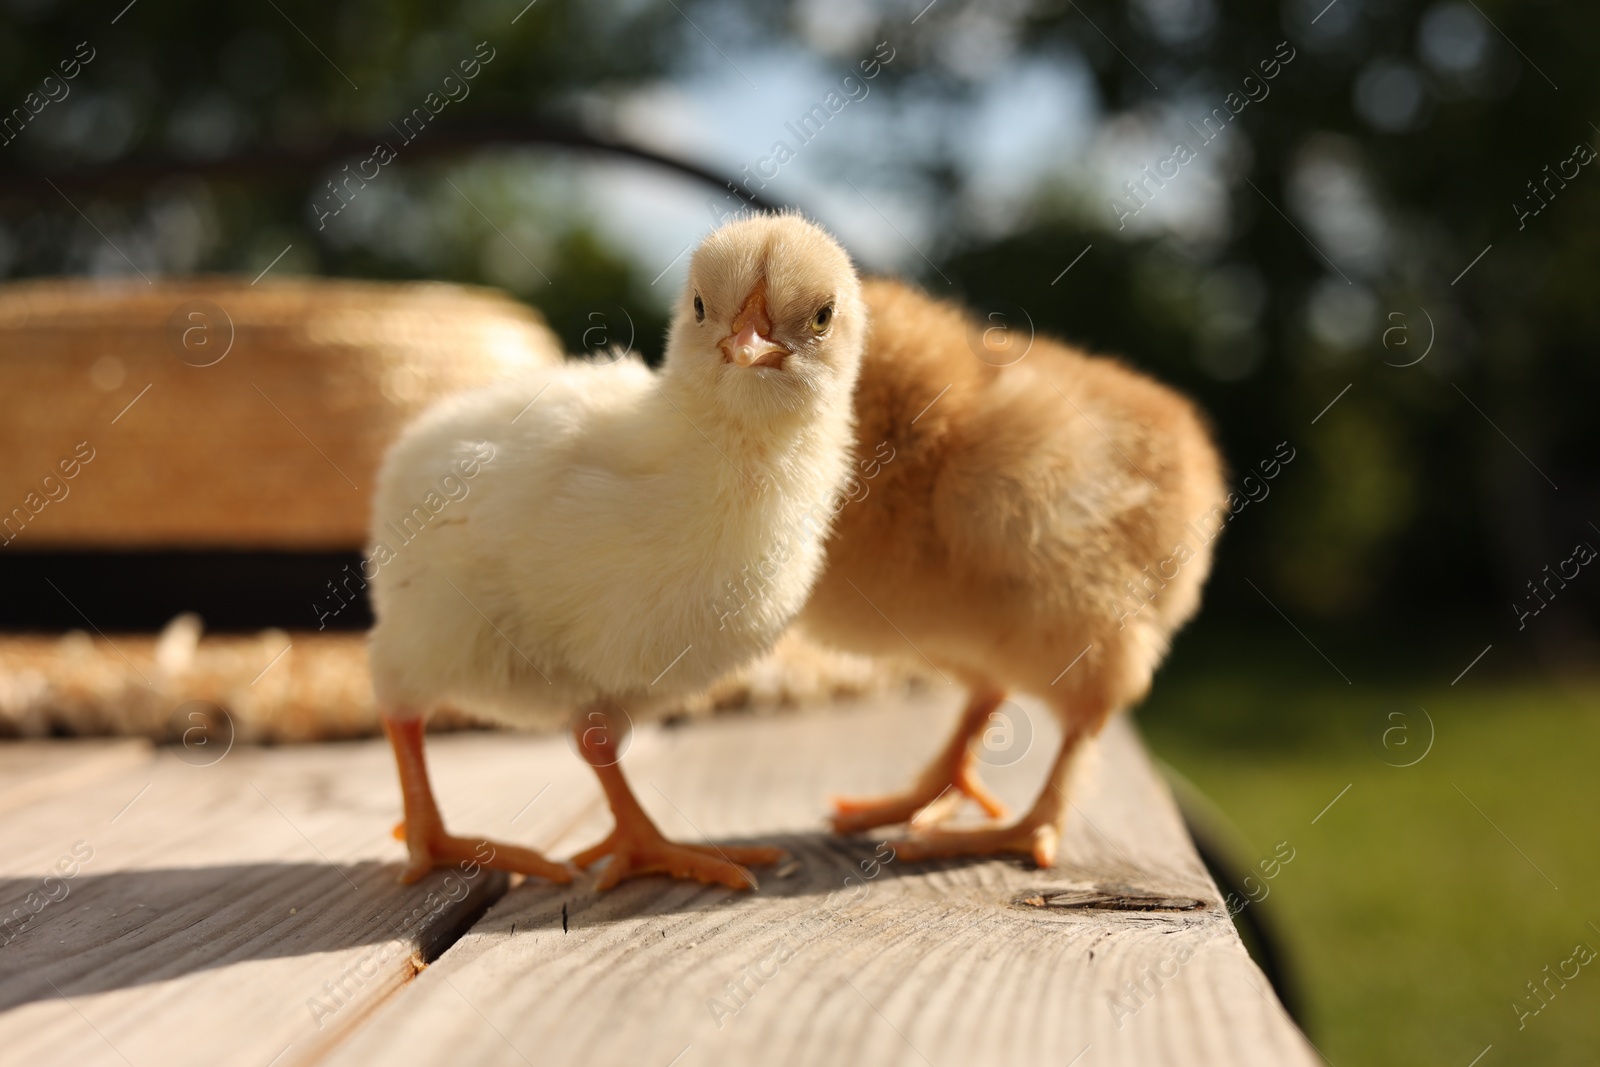 Photo of Cute chicks on wooden surface on sunny day, closeup. Baby animals